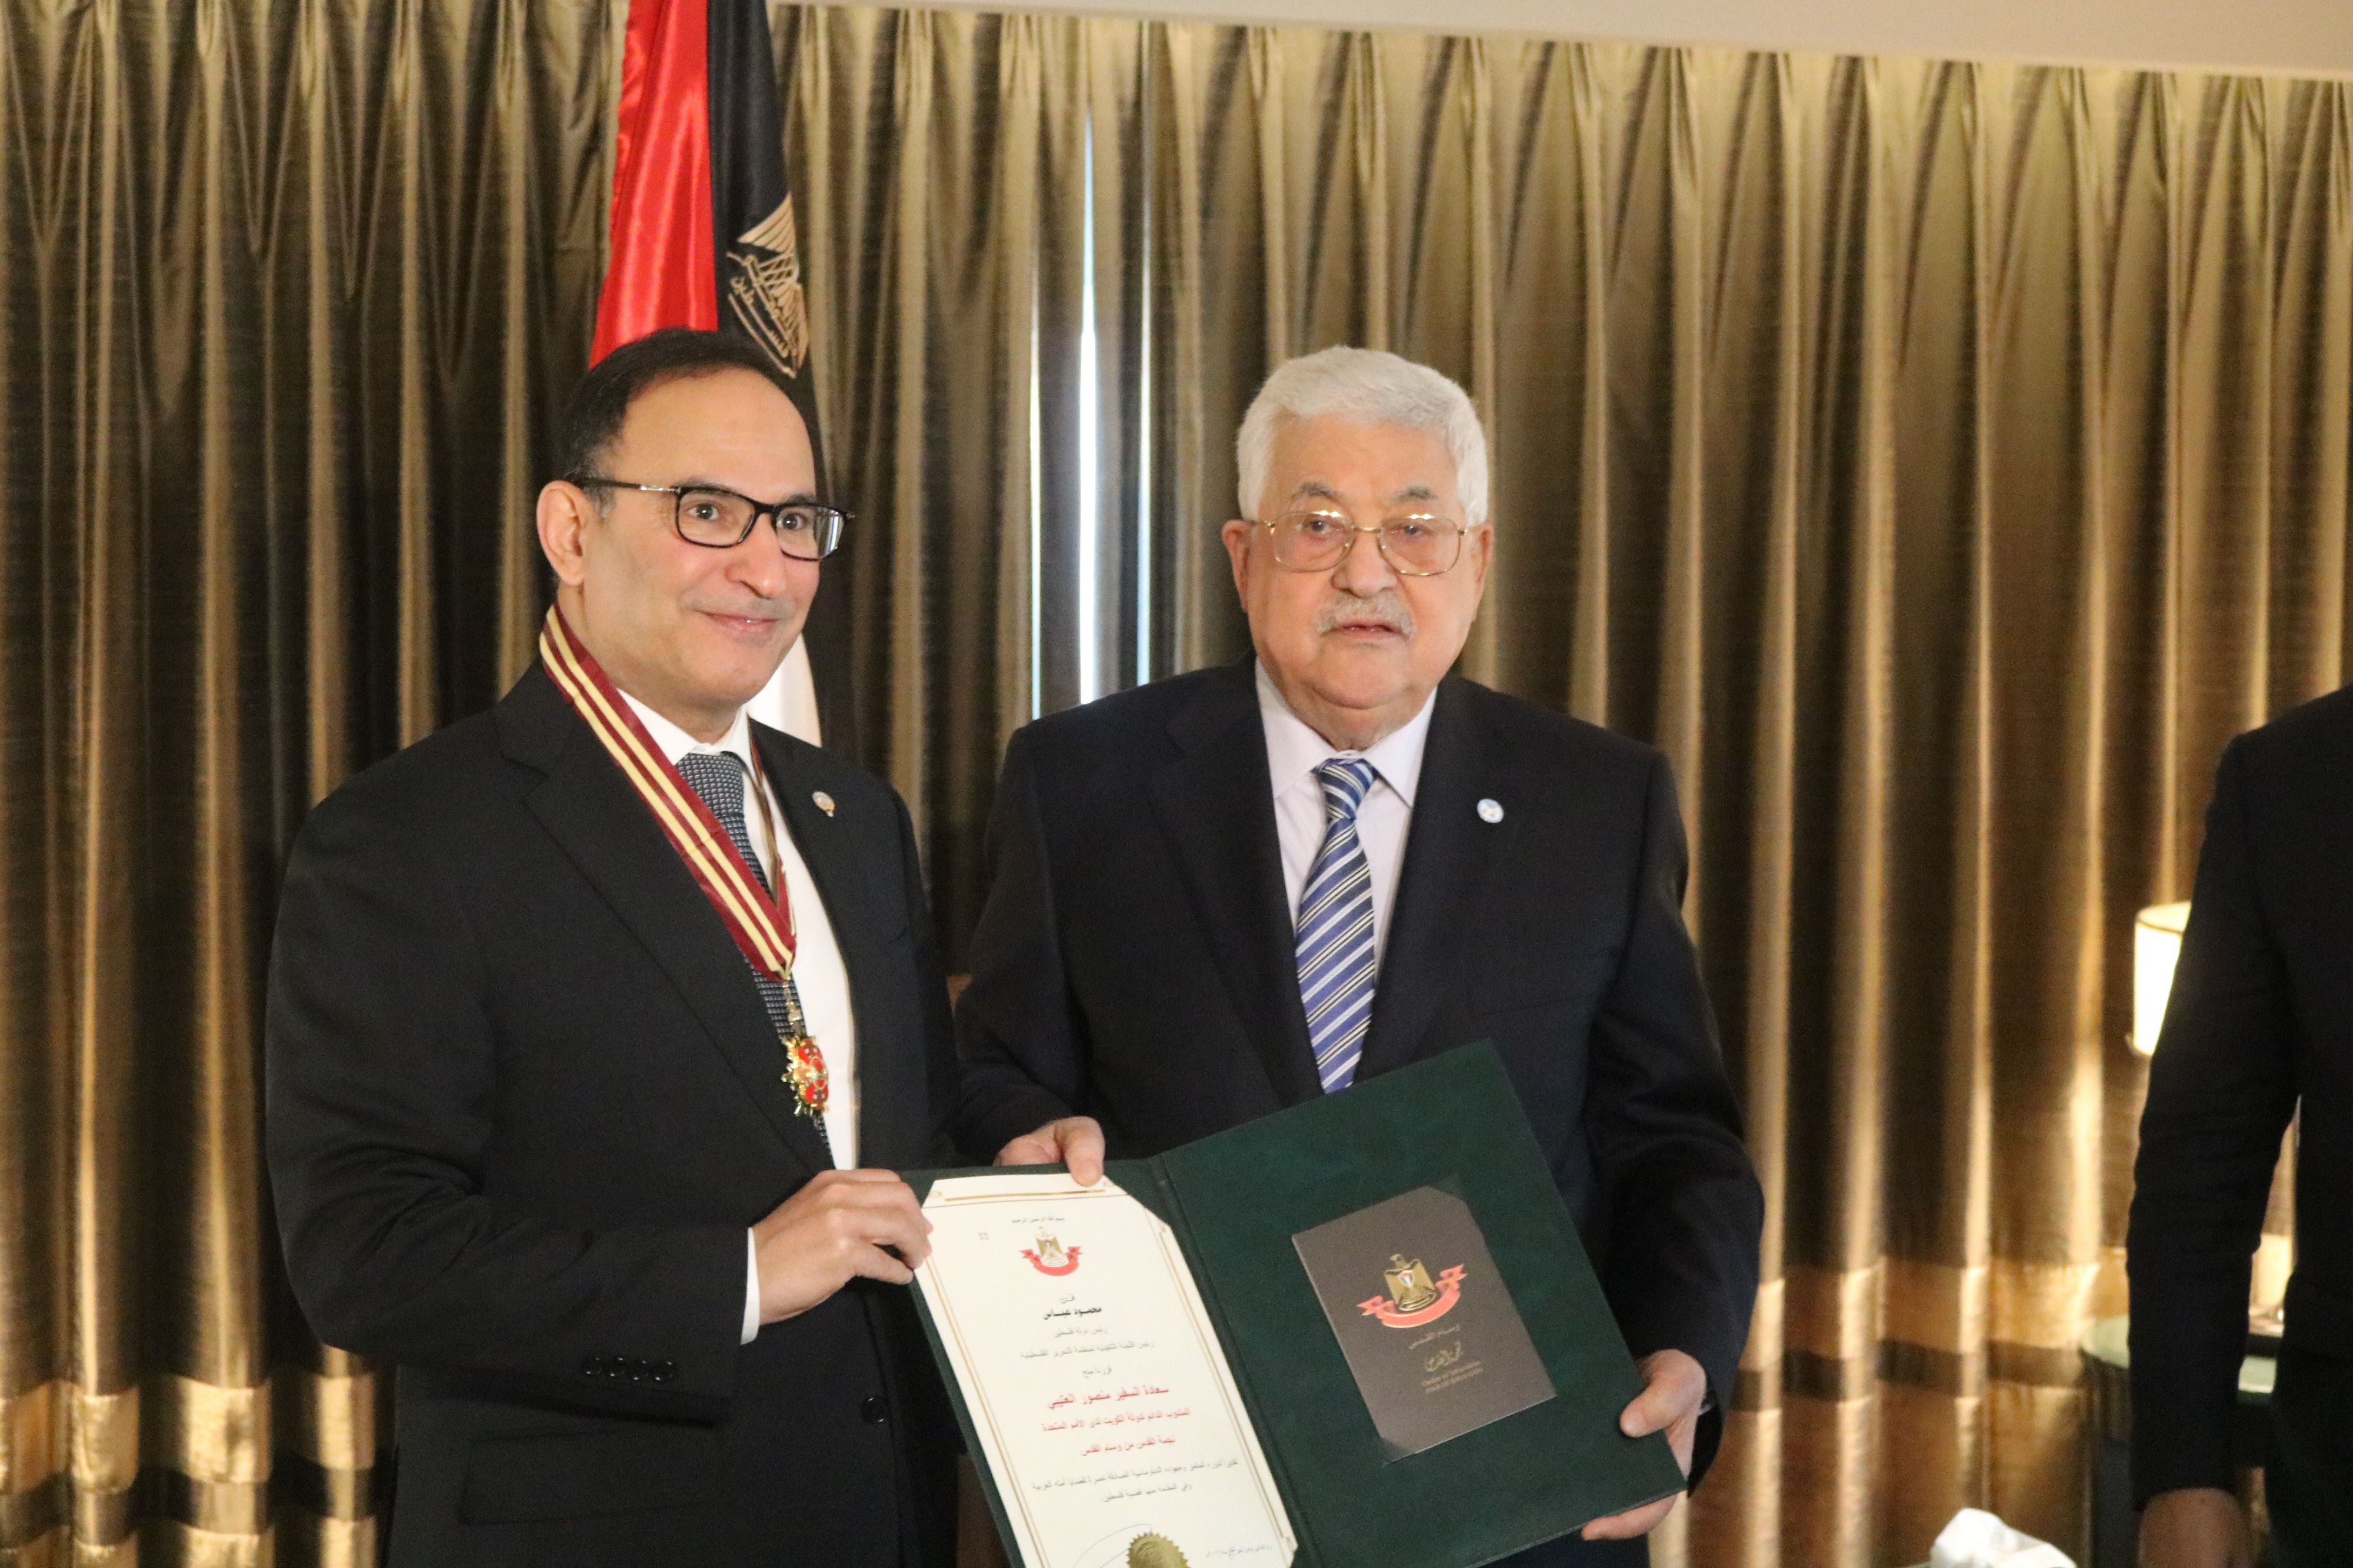 Palestinian President Mahmoud Abbas awarded Kuwait Representative to the UN headquarters in New York Ambassador Mansour Al-Otaibi "Star of Jerusalem Medal" in recognition of his outstanding role and diplomatic efforts